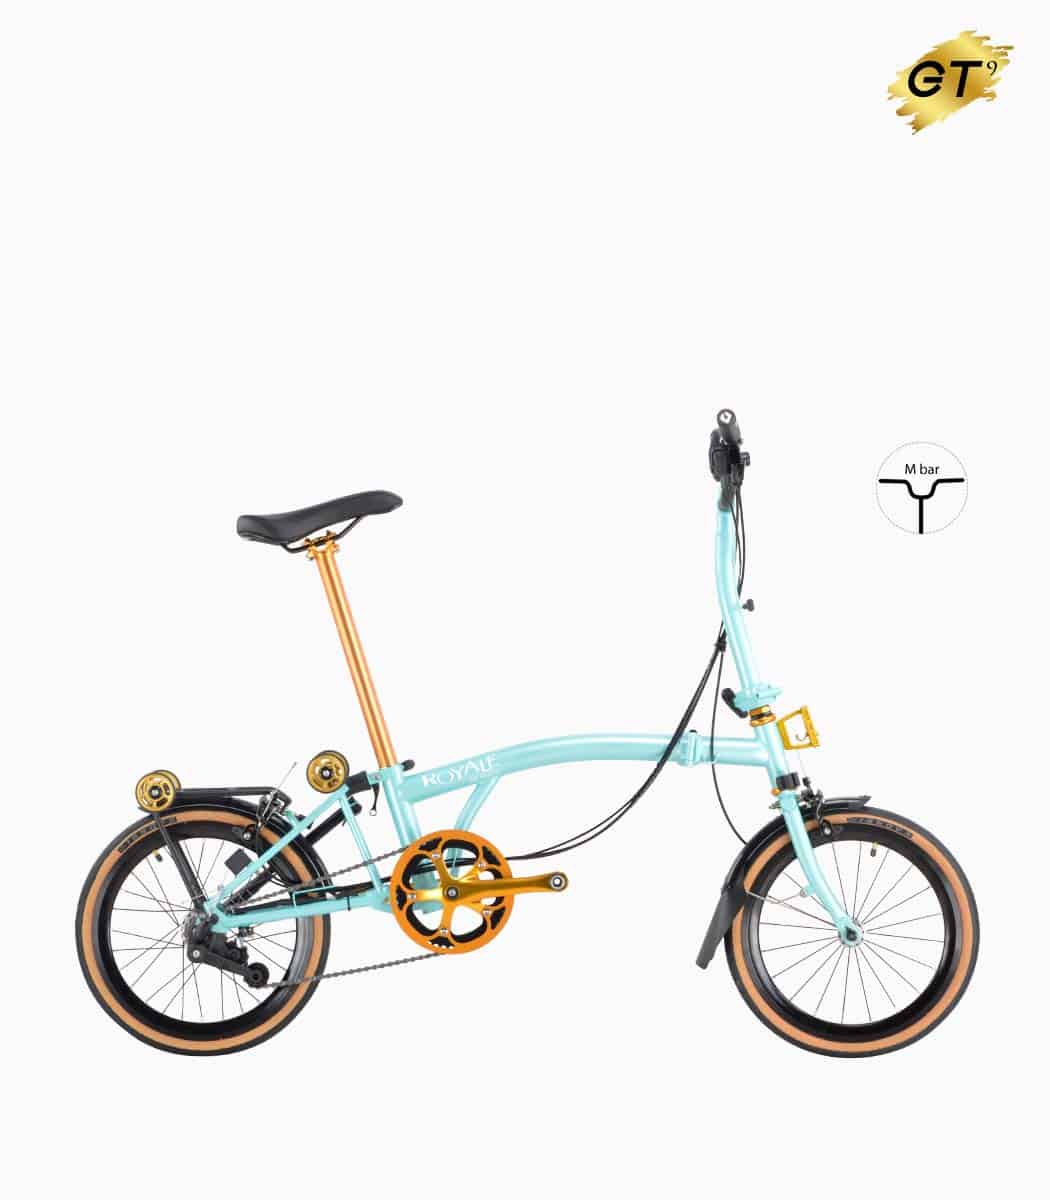 MOBOT ROYALE GT M9 (ICY BLUE) foldable bicycle gold edition M-bar with tanwall tyres high profile rim right